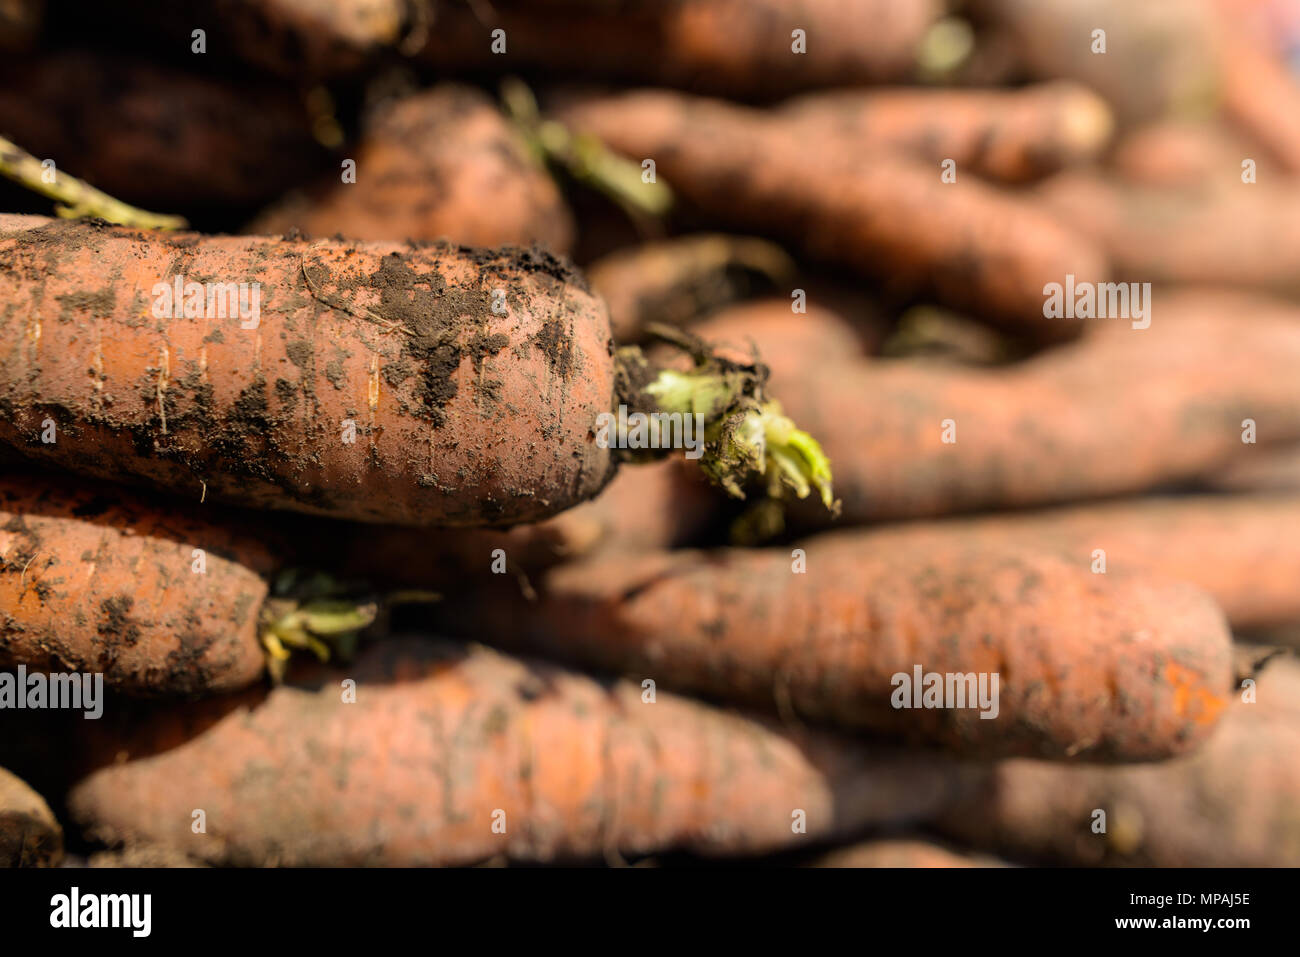 Close-Up Of Dirty Organic Carrots For Sale Stock Photo